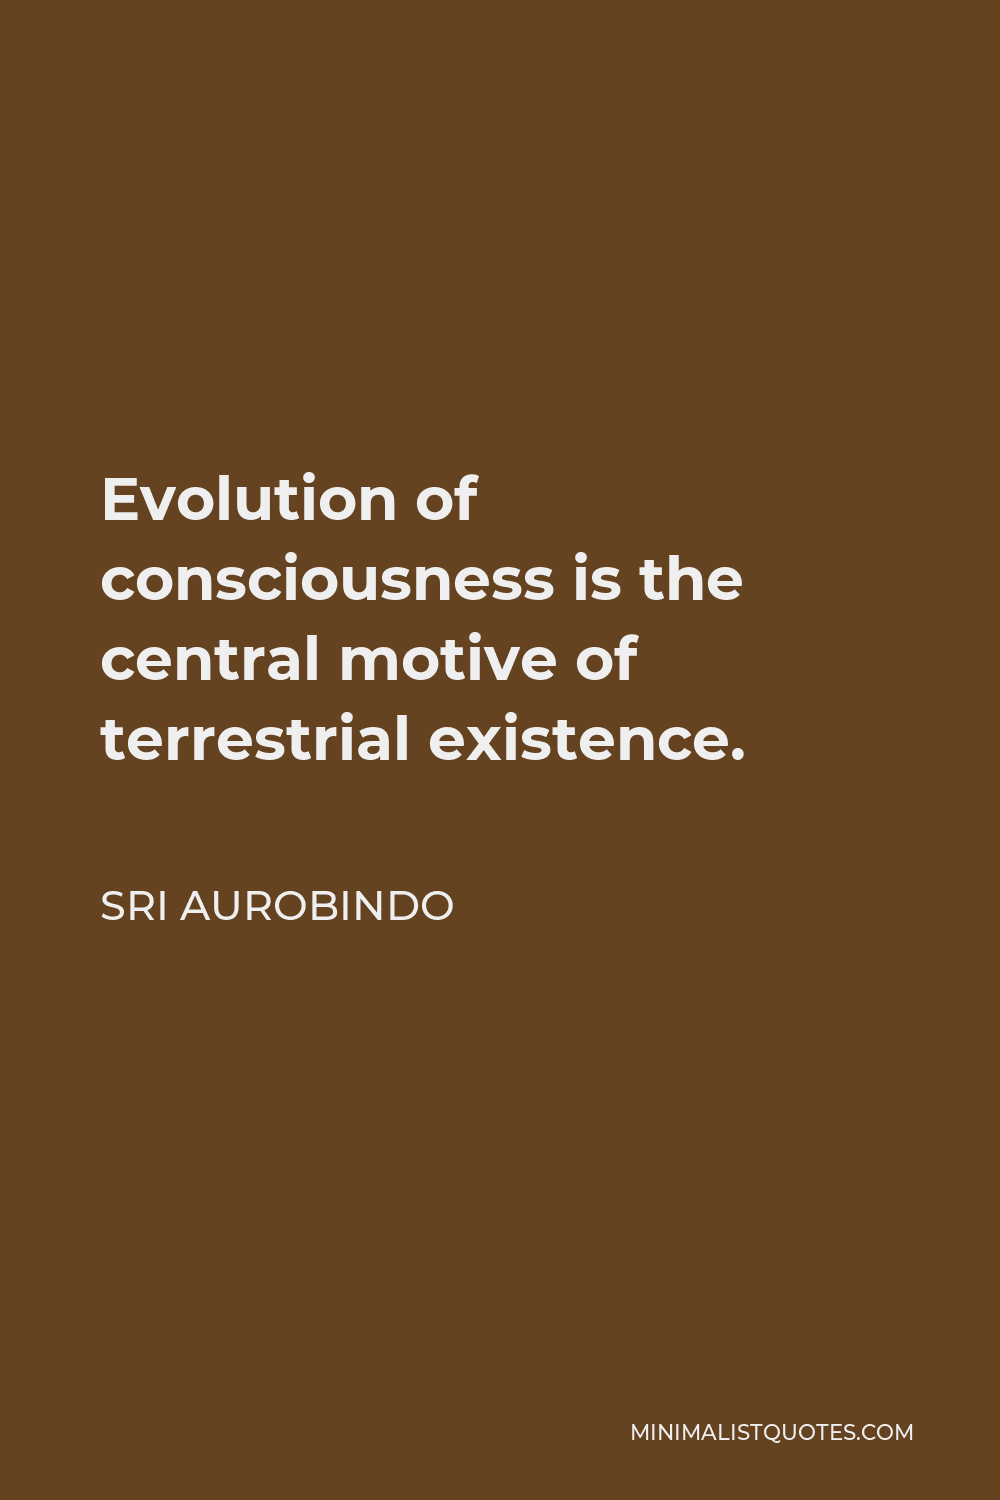 Sri Aurobindo Quote - Evolution of consciousness is the central motive of terrestrial existence.